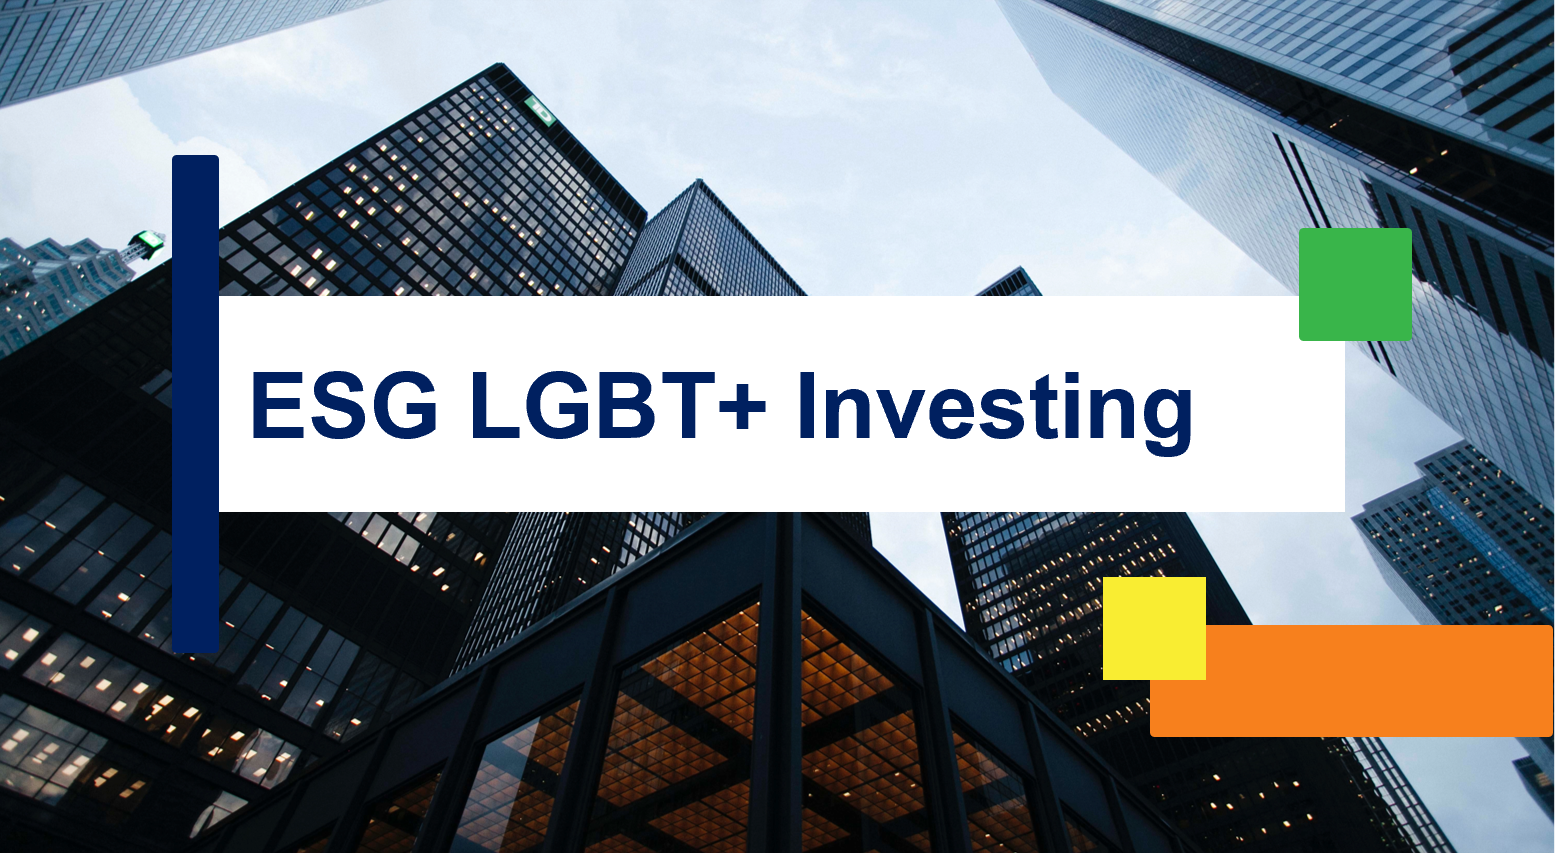 Insights Training Session Image showing title, "ESG LGBT Investing" 